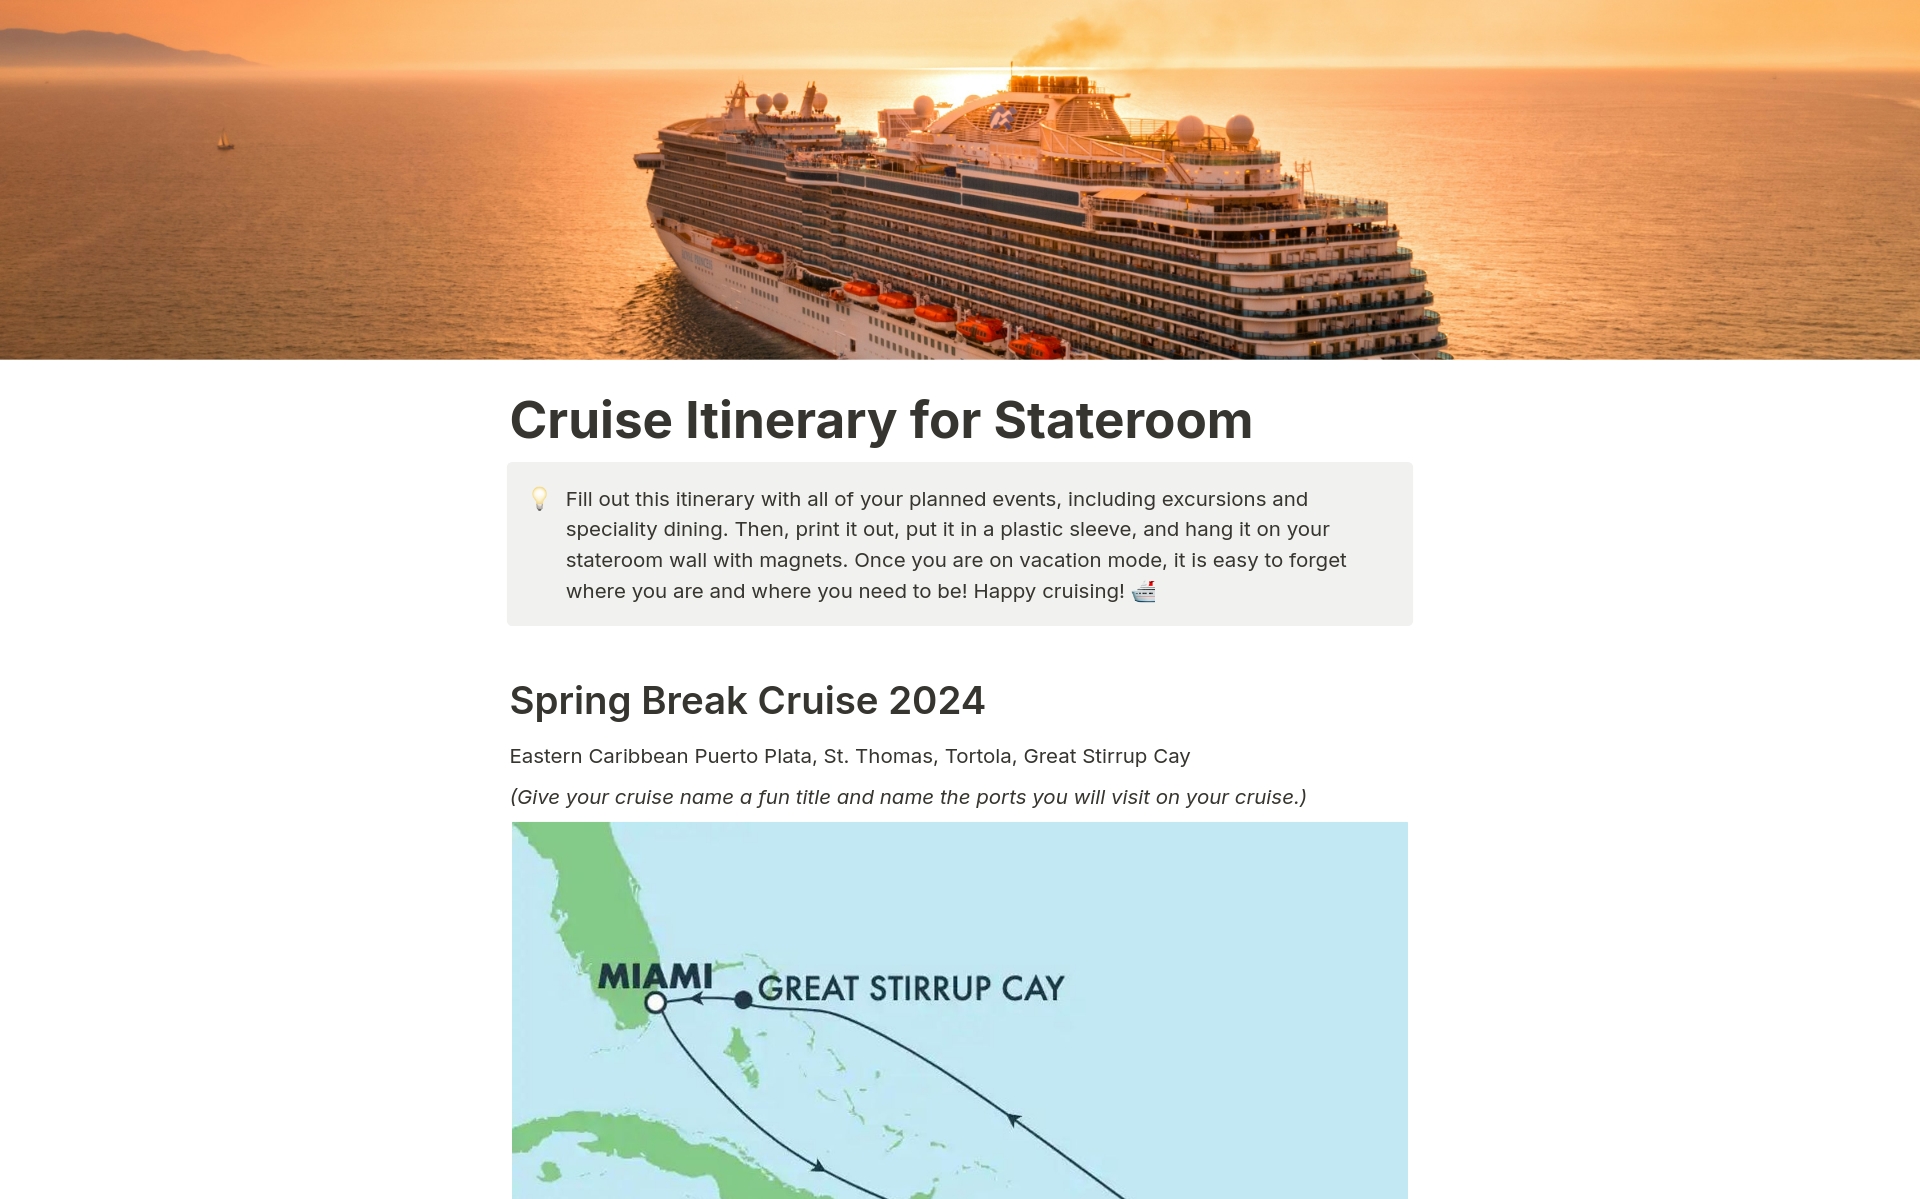 Simple one-page itinerary to print and hang in cruise stateroom. Perfect for families and kids who like to see a visual map! 